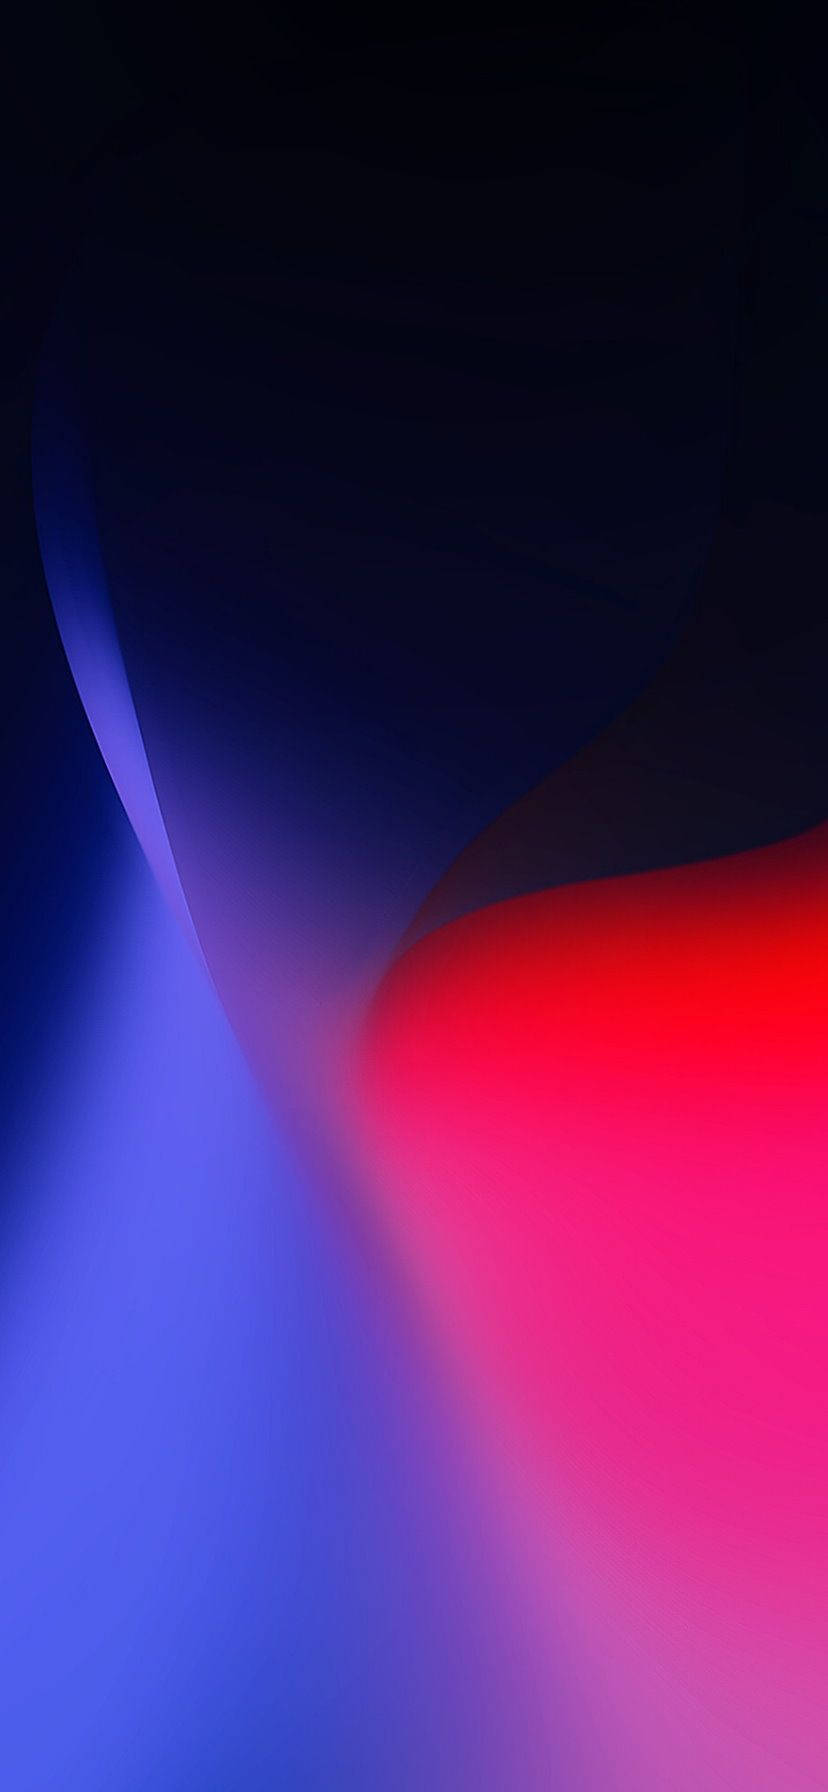 Iphone Xr Blue Red Coiled Wallpaper